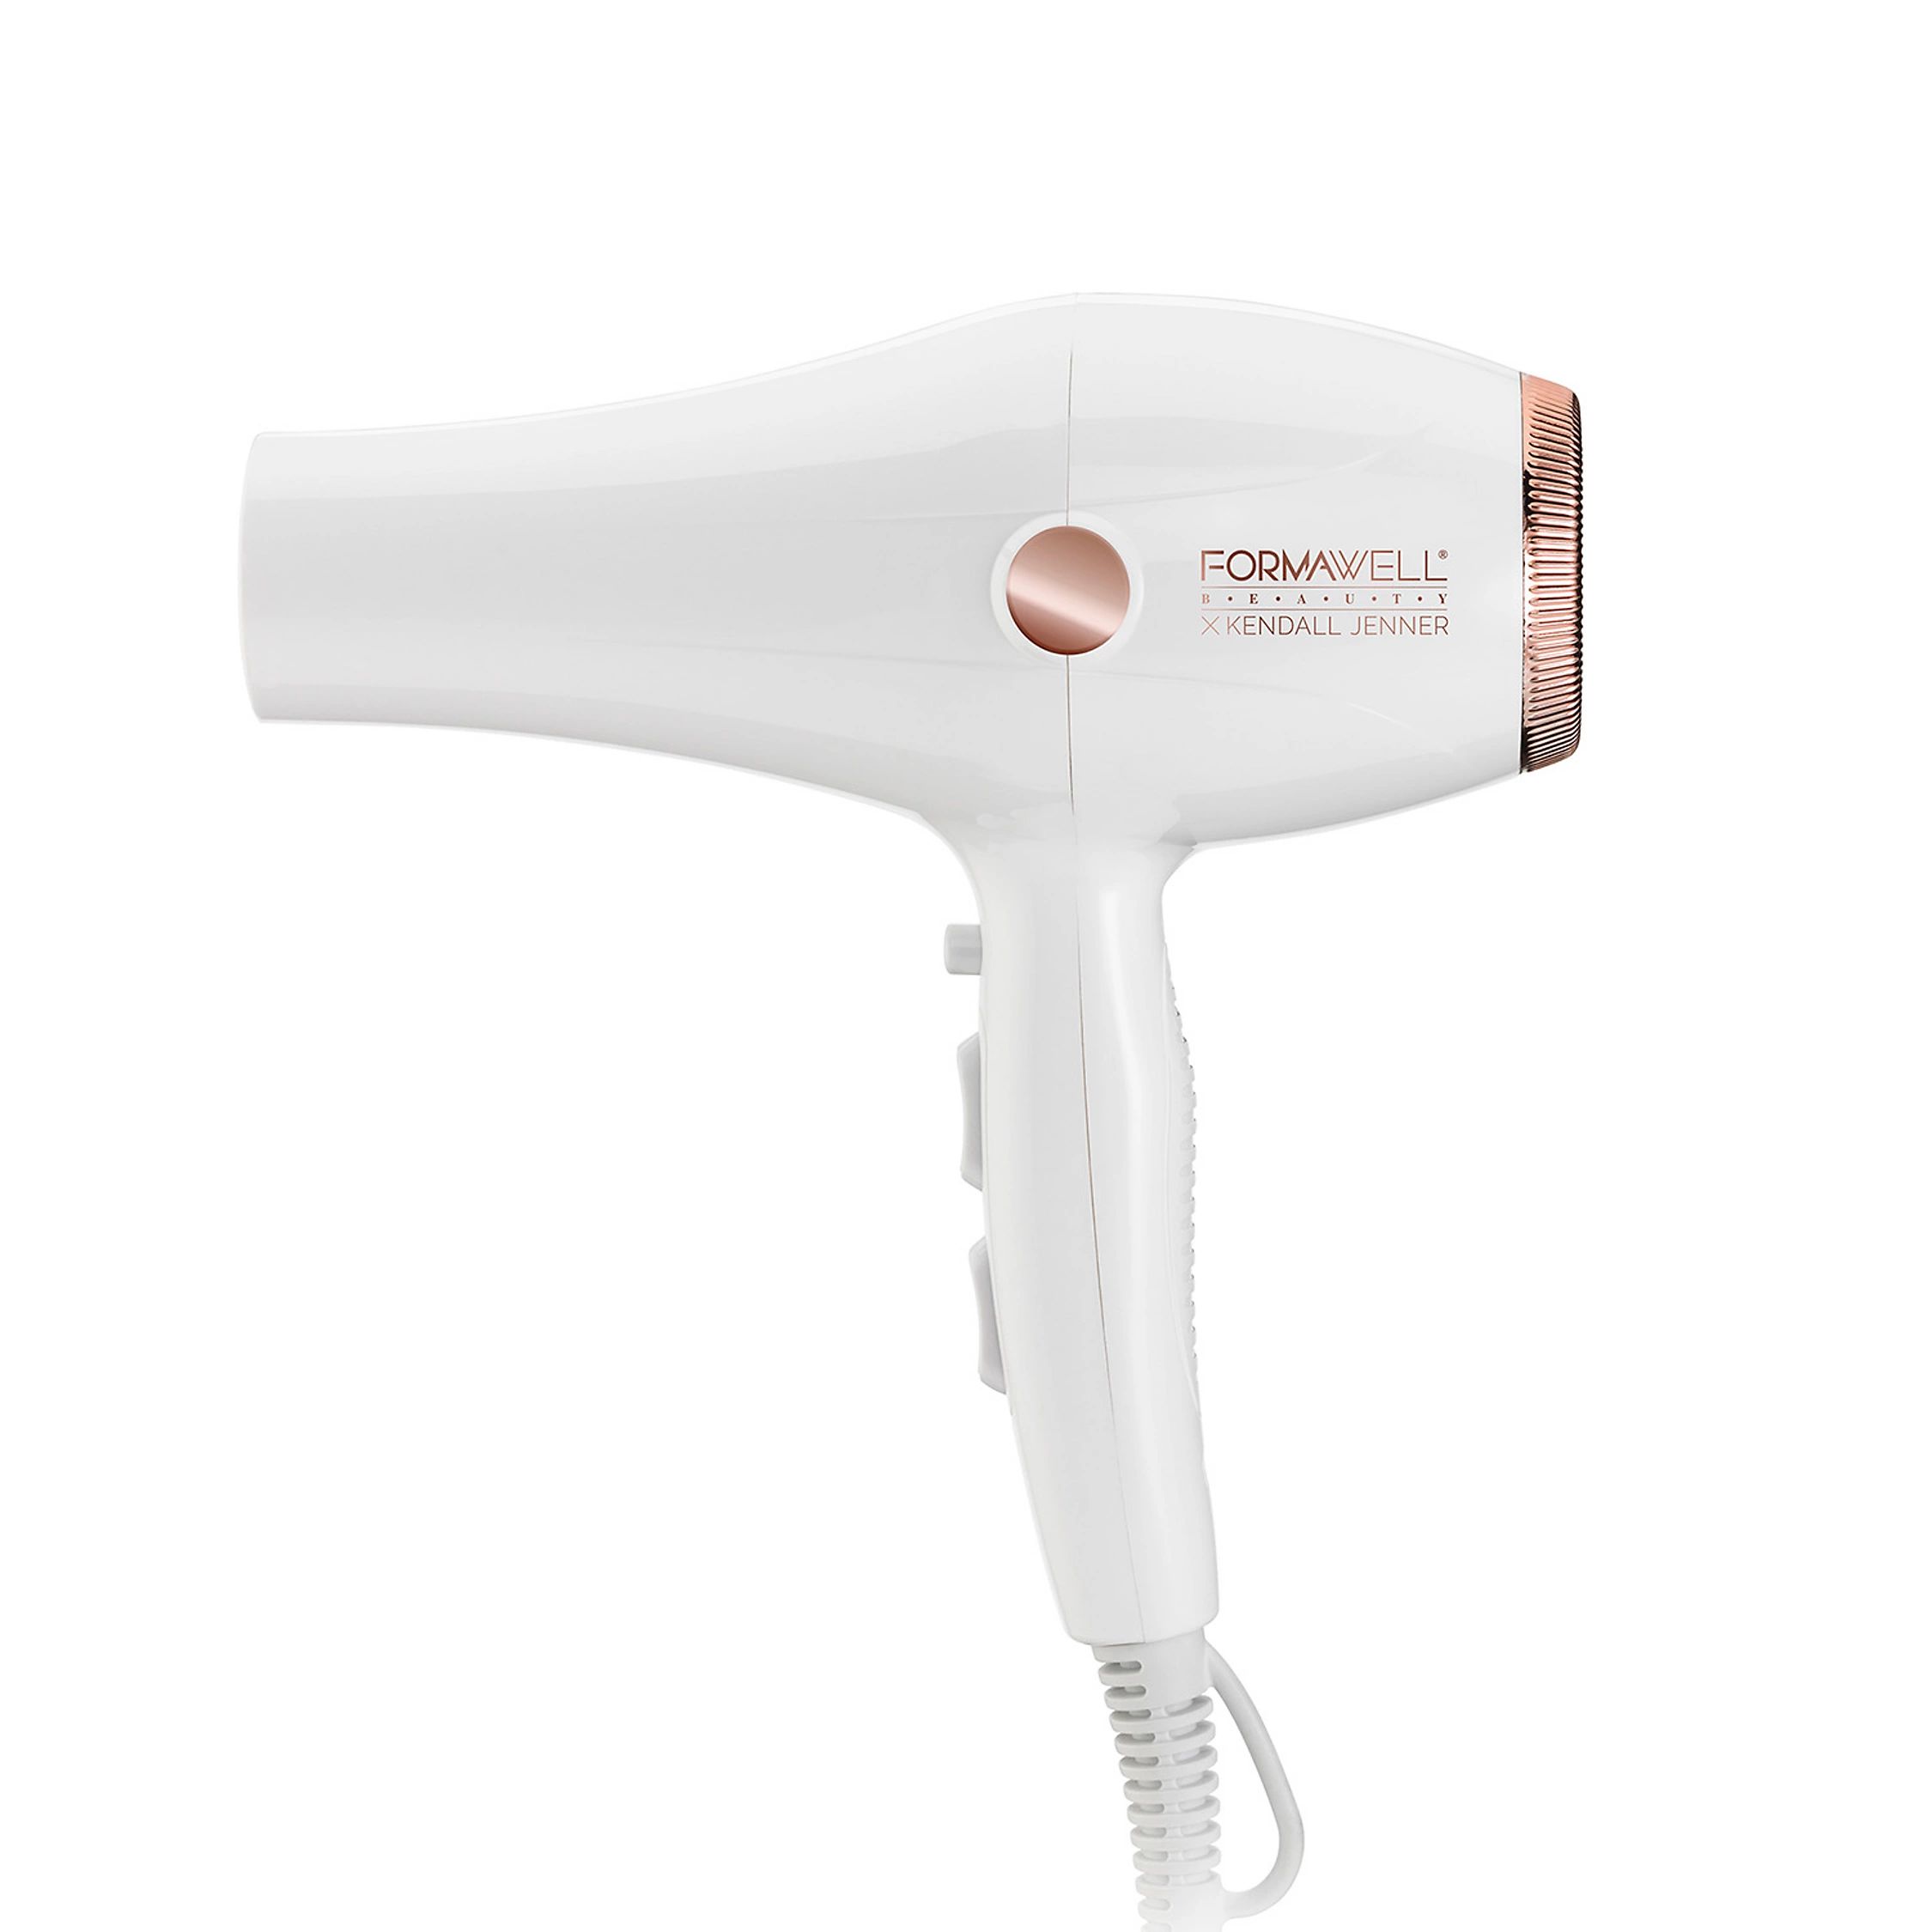 Formawell Beauty x Kendall Jenner Ionic Hair Dryer | Kohl's